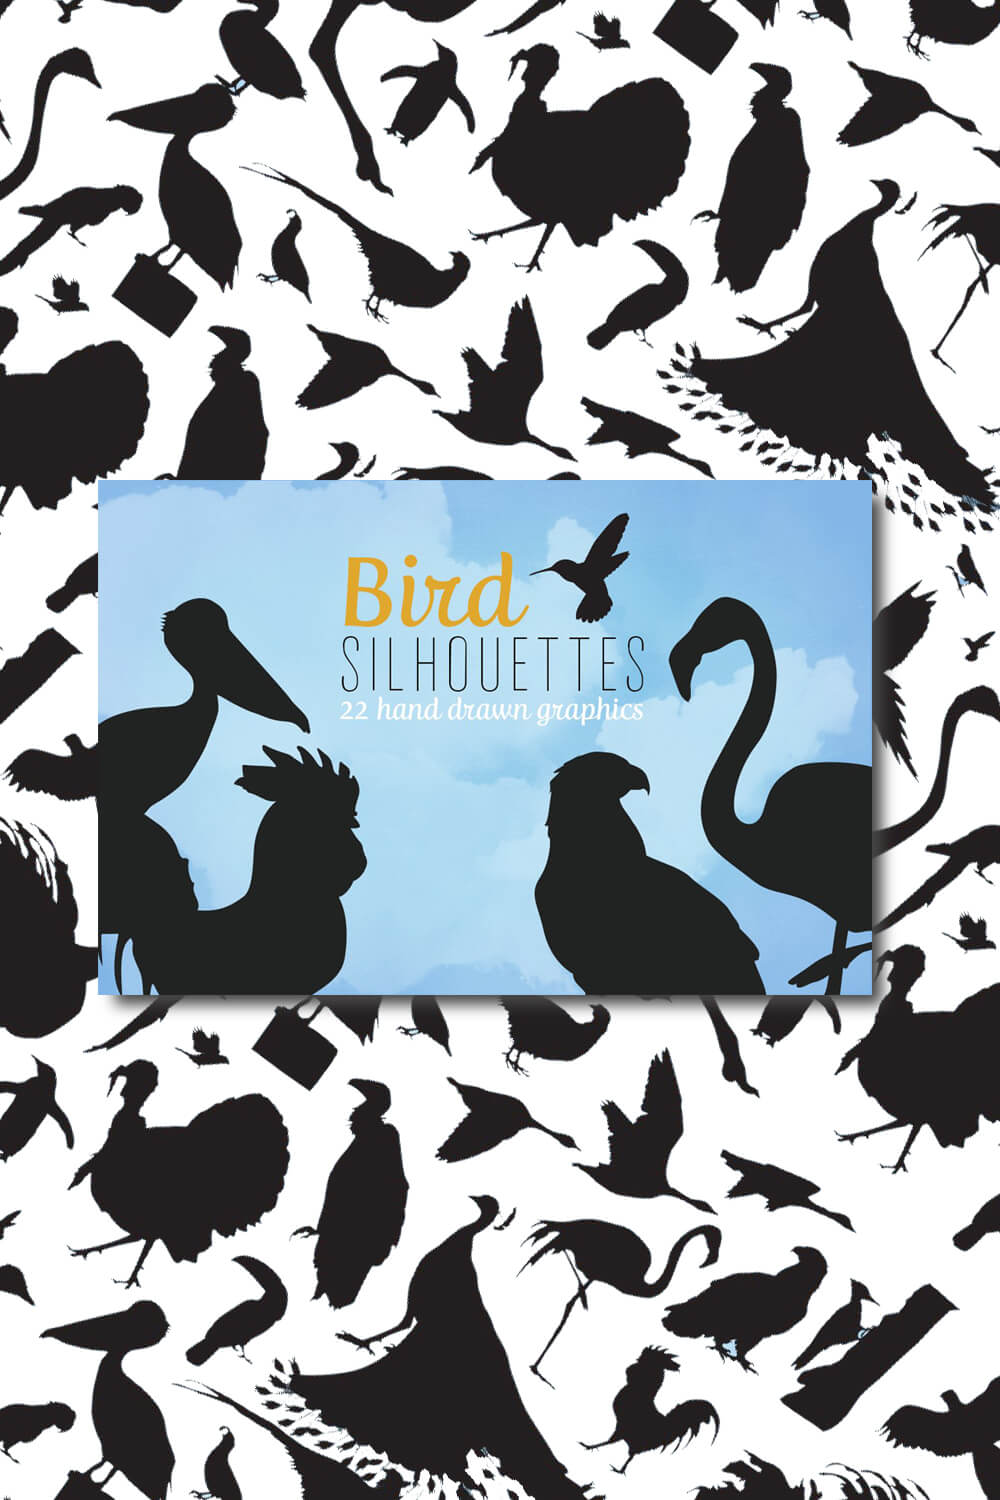 Color slide with silhouettes of birds on a black and white background.